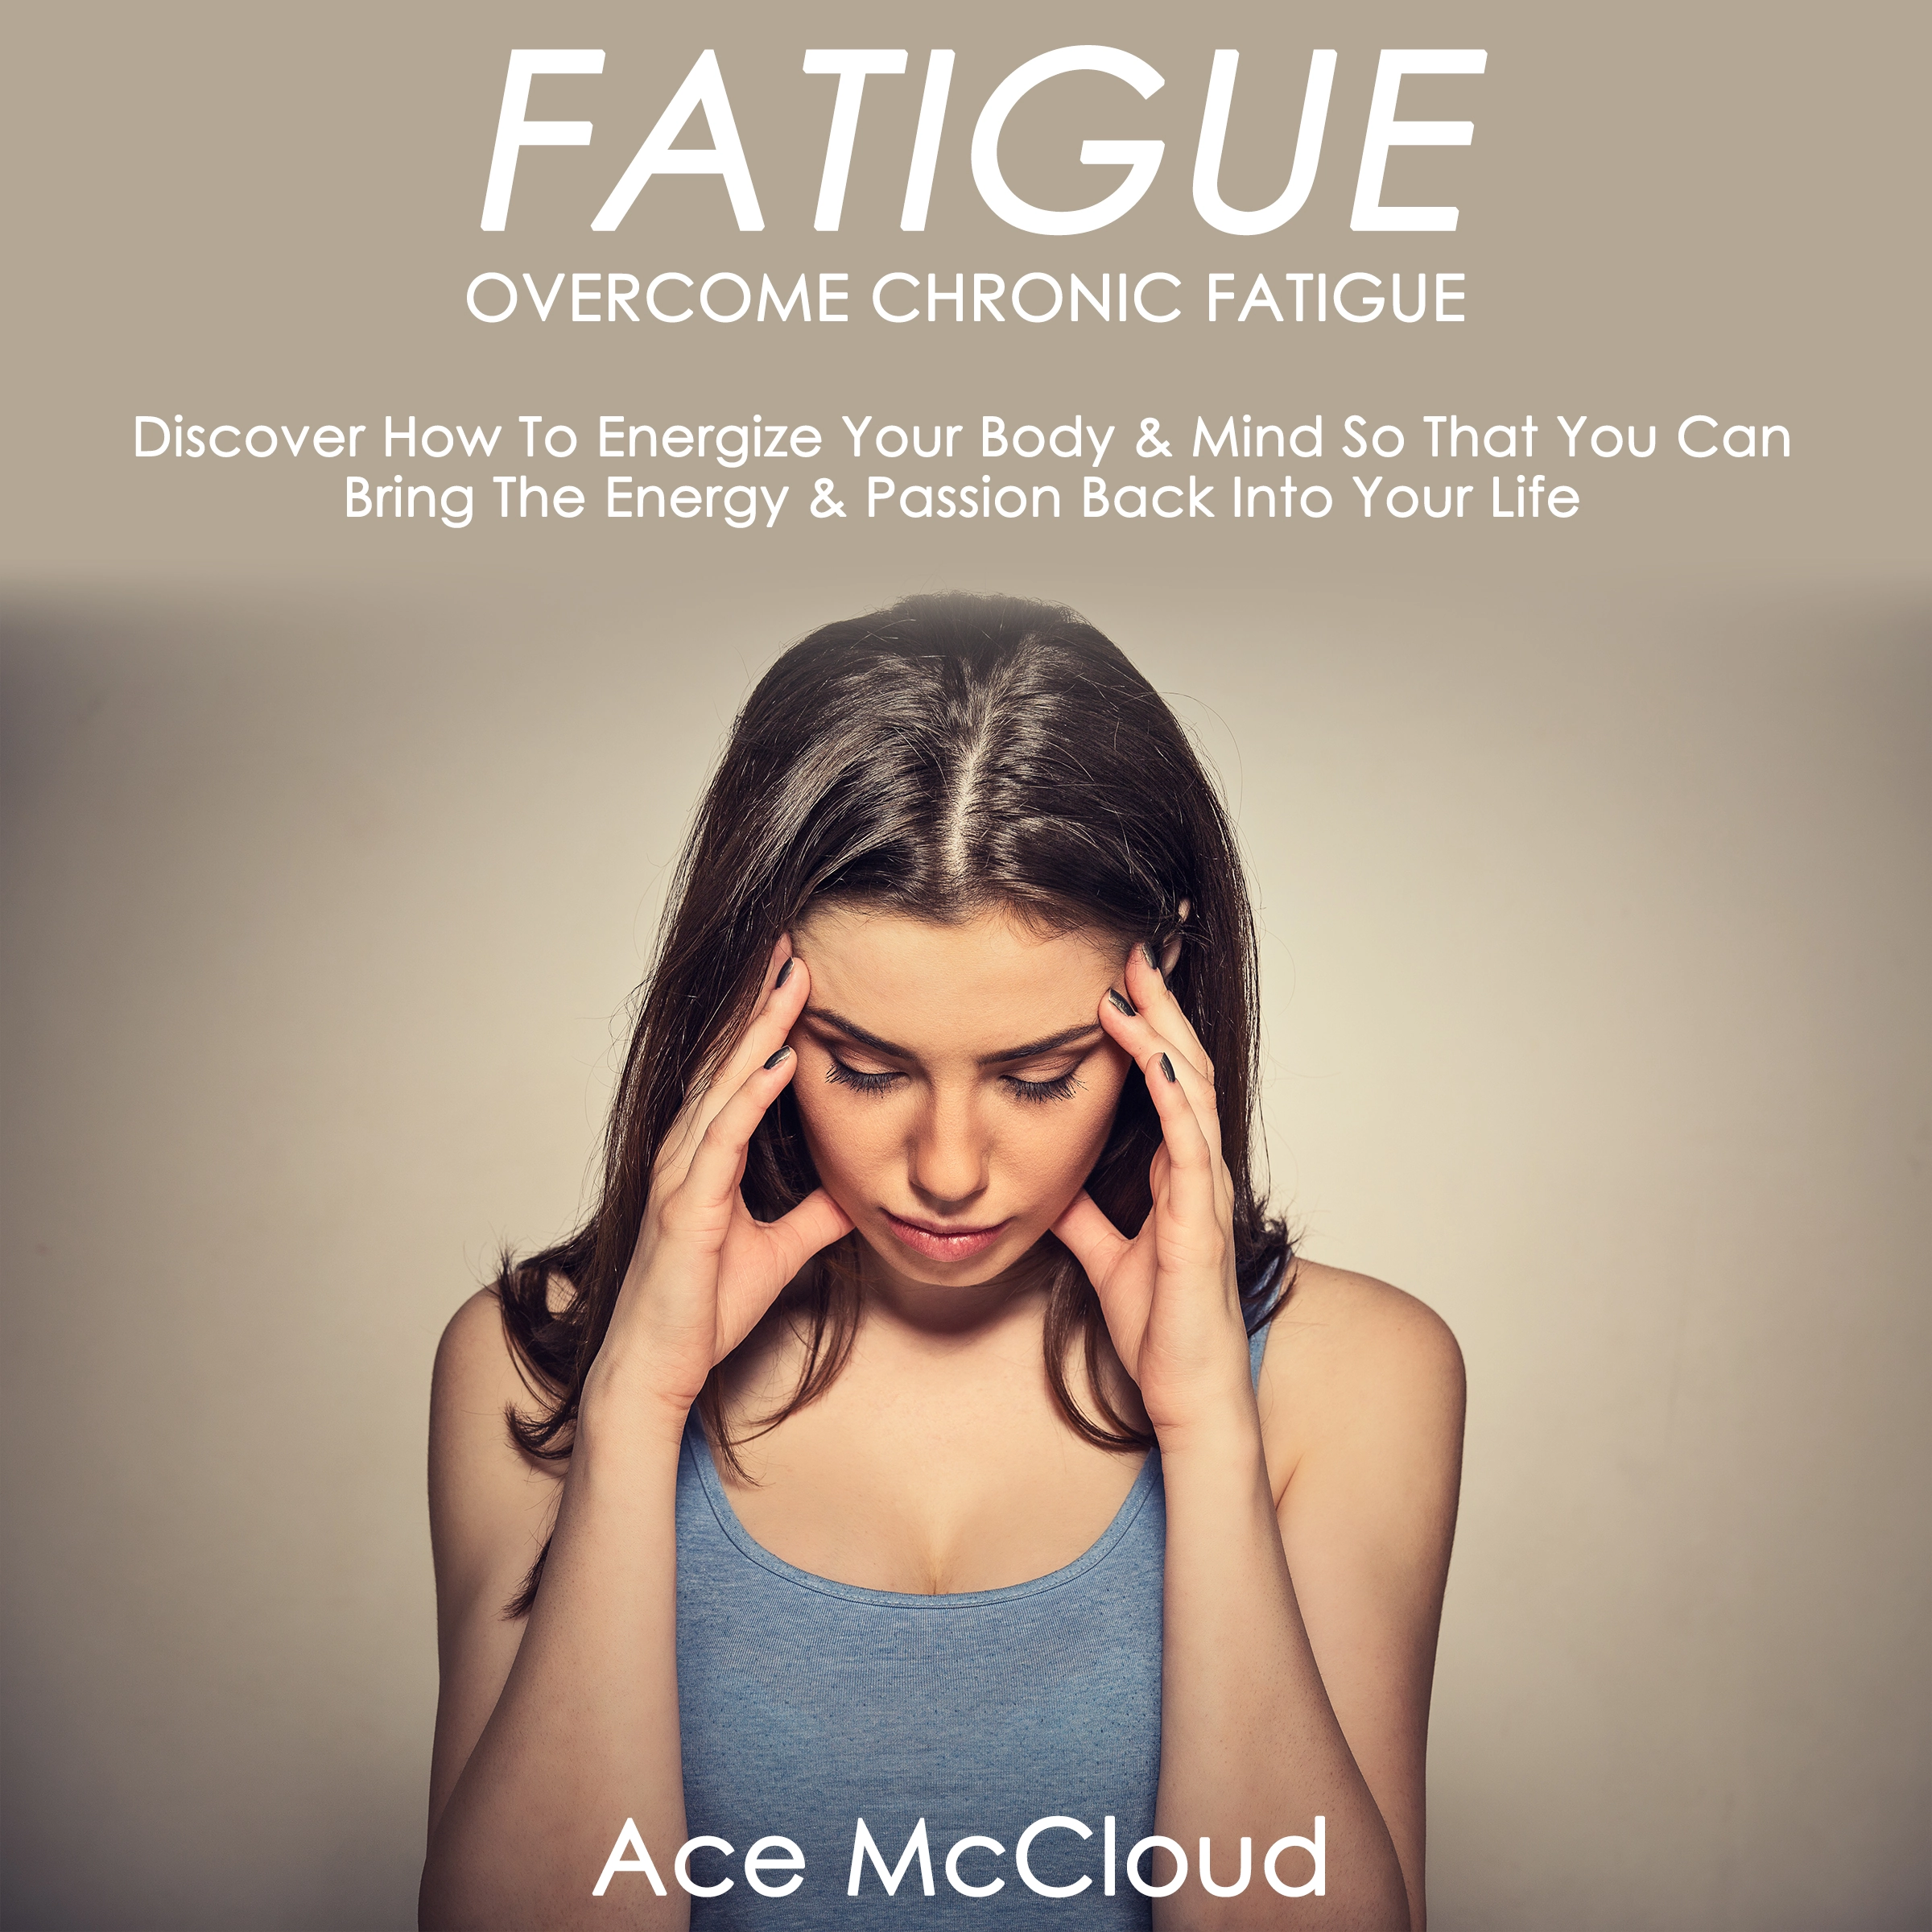 Fatigue: Overcome Chronic Fatigue: Discover How To Energize Your Body & Mind So That You Can Bring The Energy & Passion Back Into Your Life Audiobook by Ace McCloud